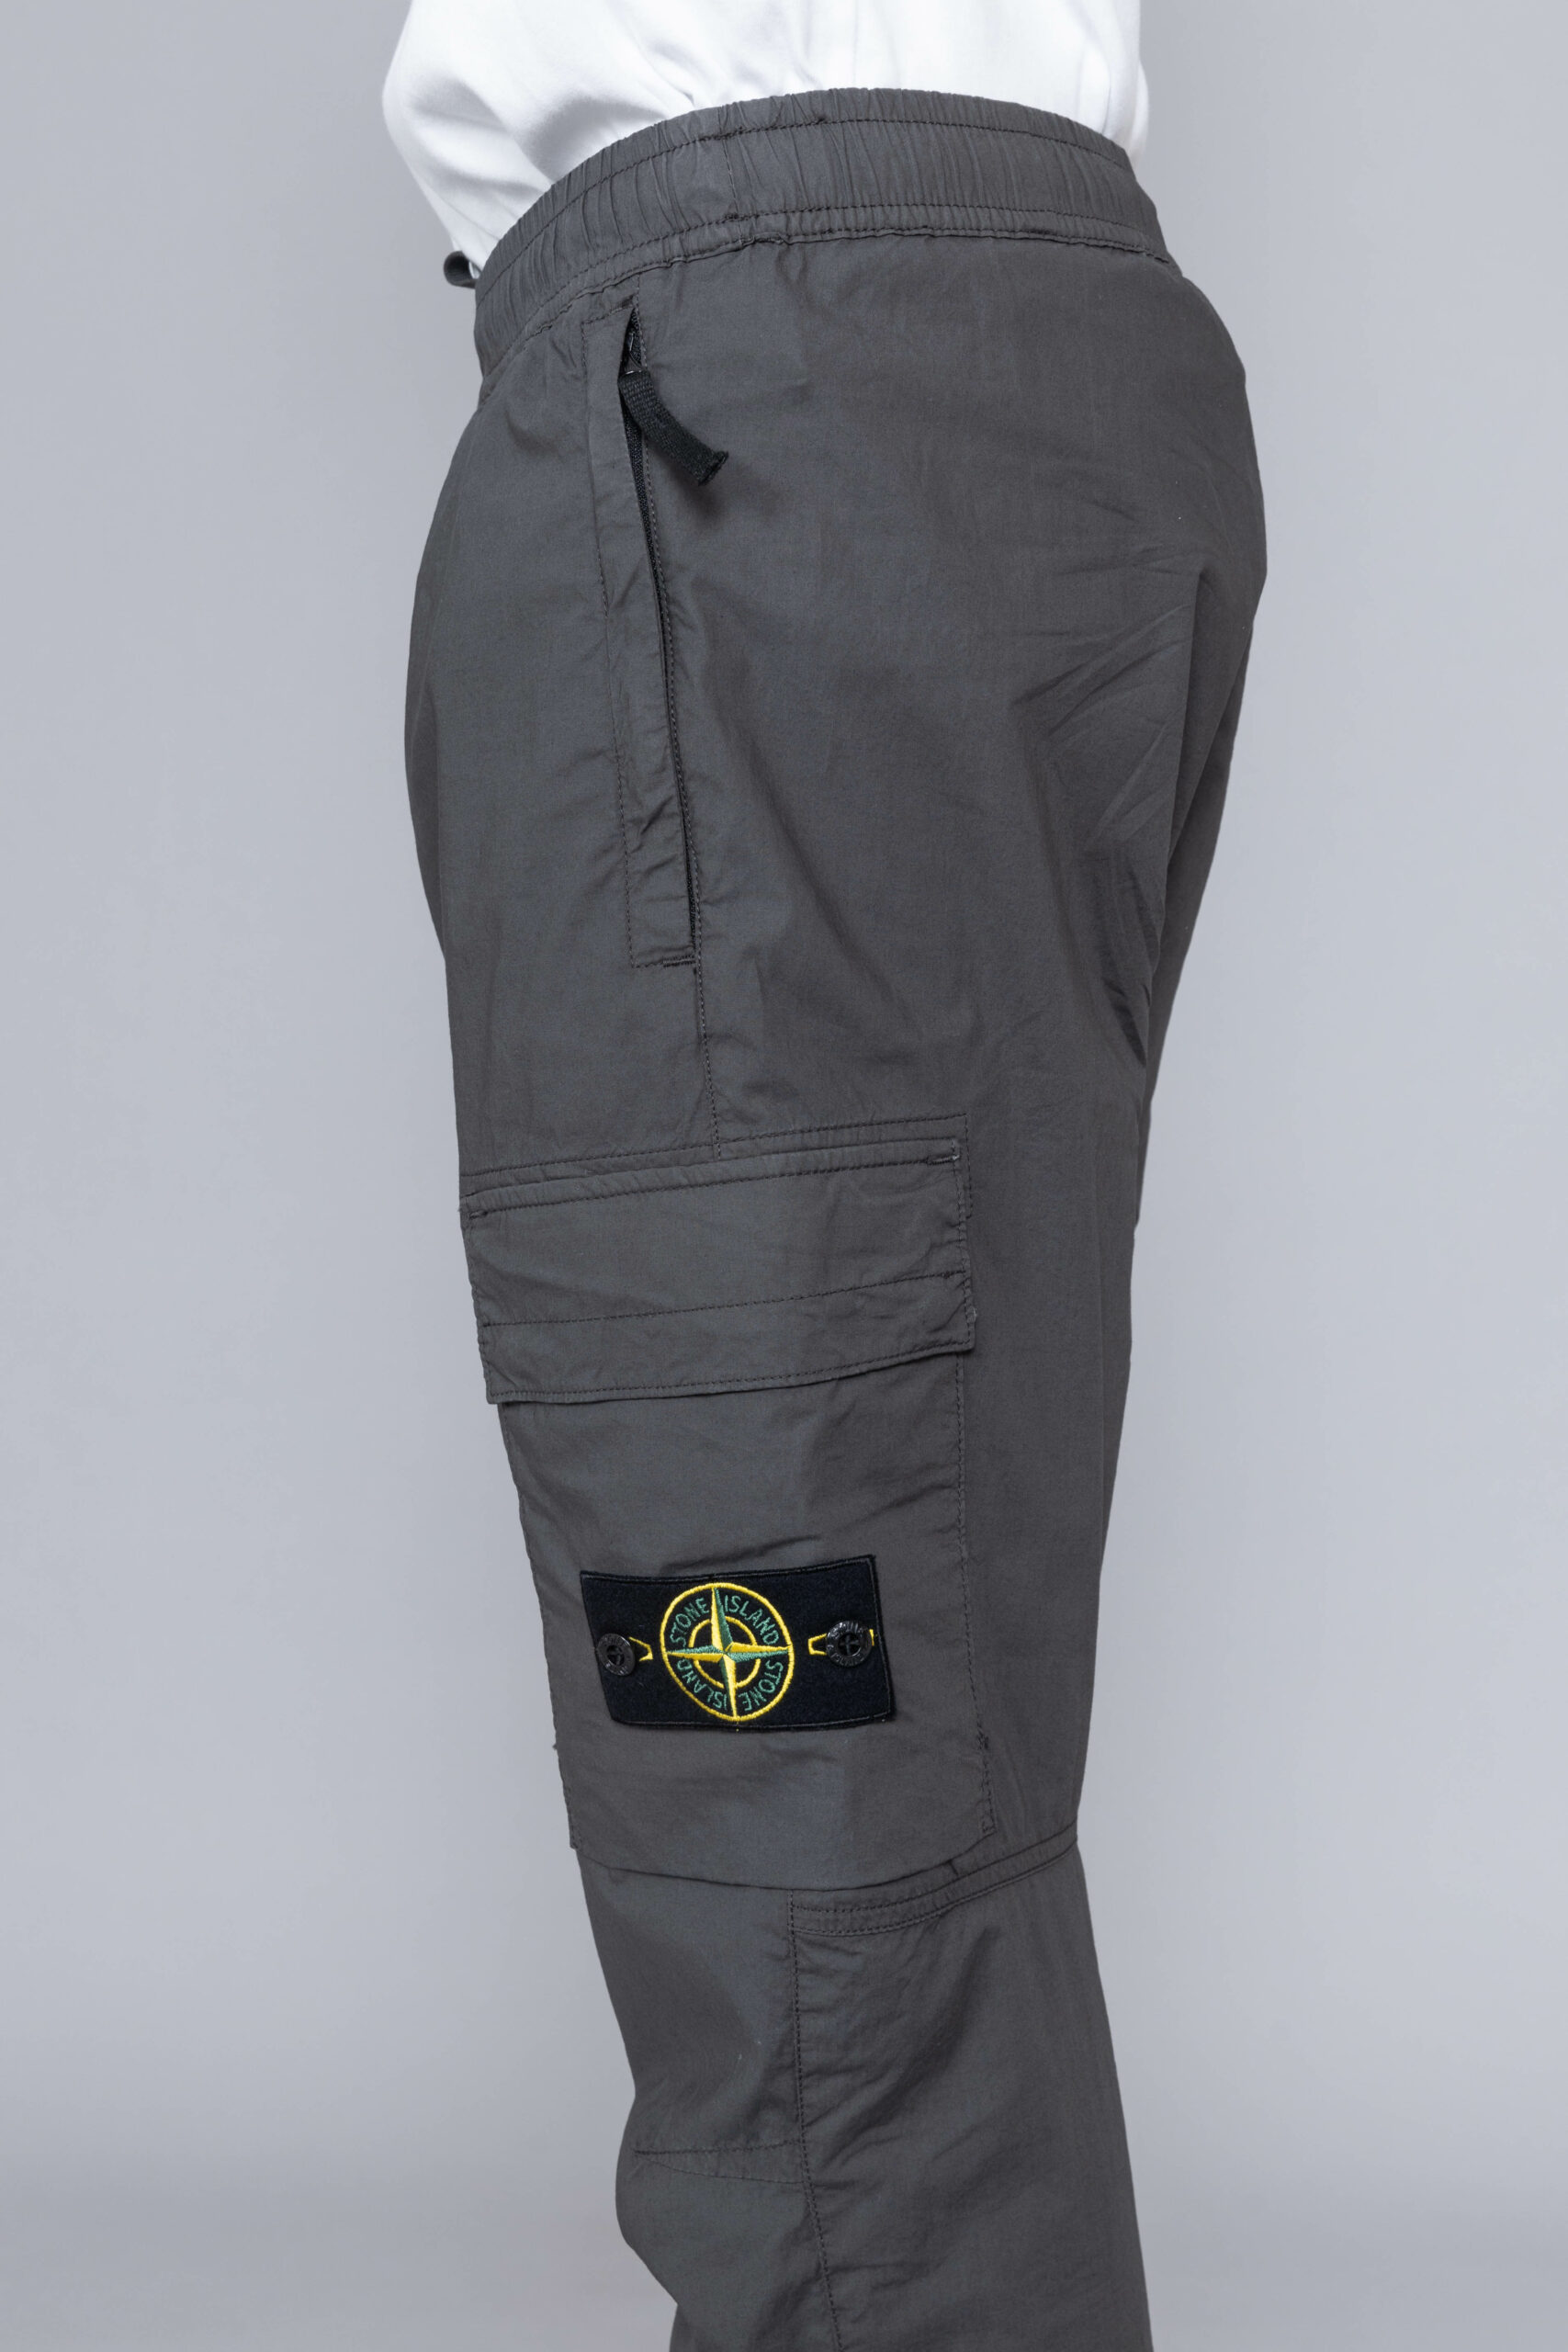 Stone Island Cargo Pants outlet - Men - 1800 products on sale |  FASHIOLA.co.uk